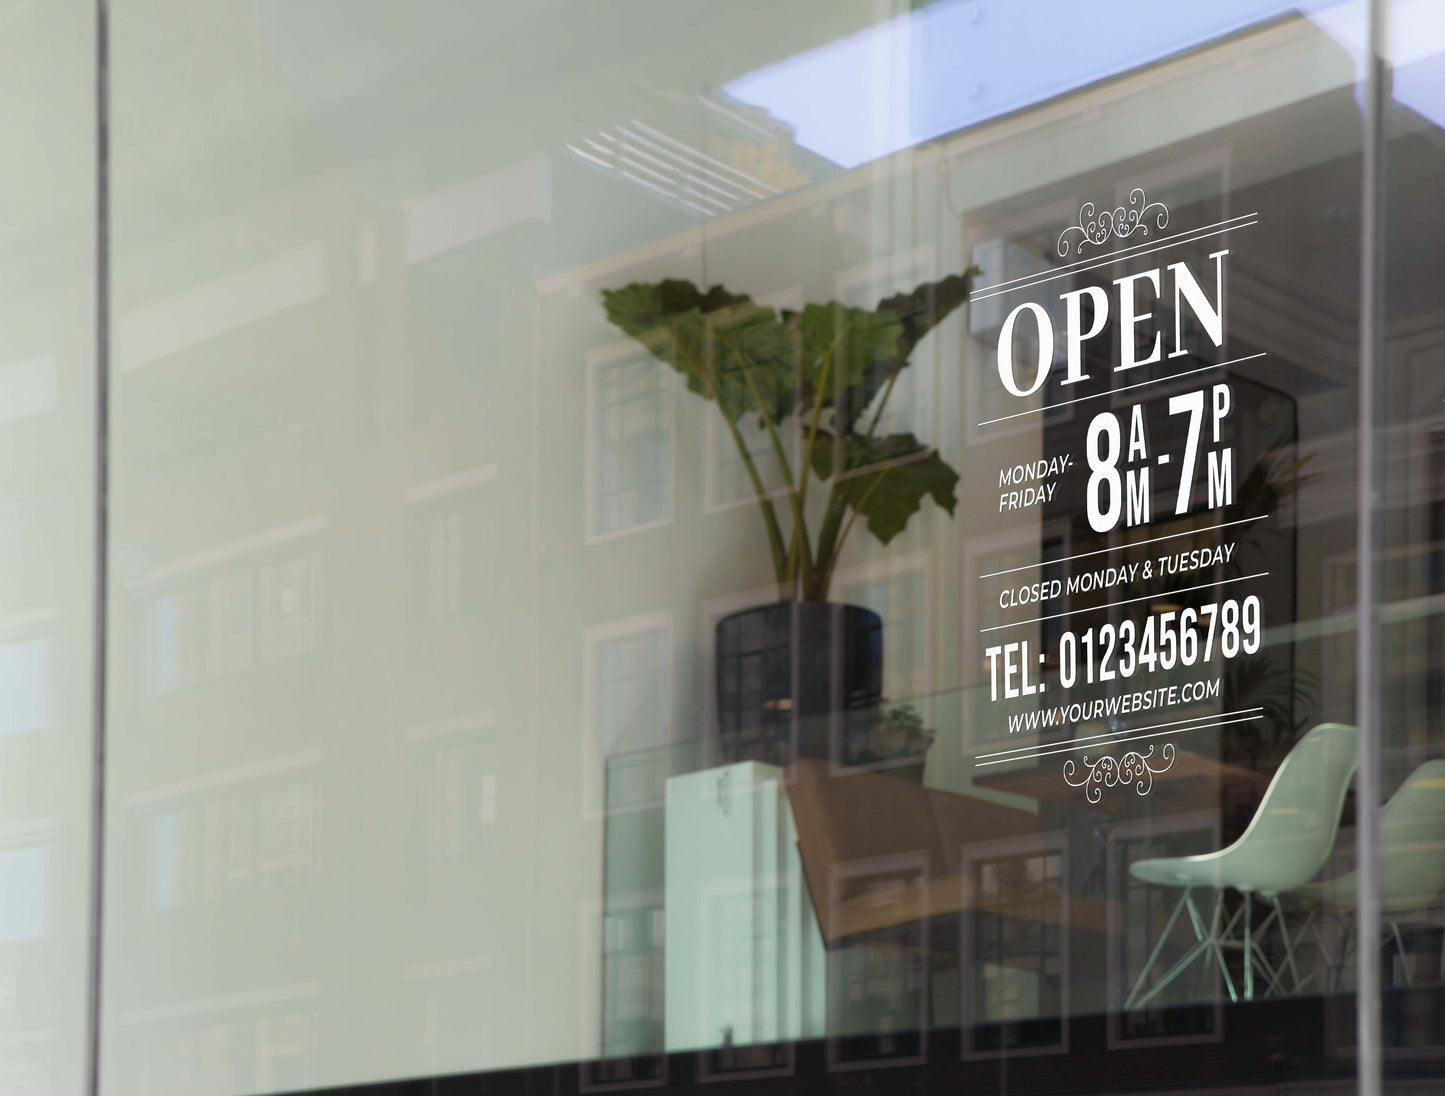 Opening Hours | Personalised Window Decal for Retailers